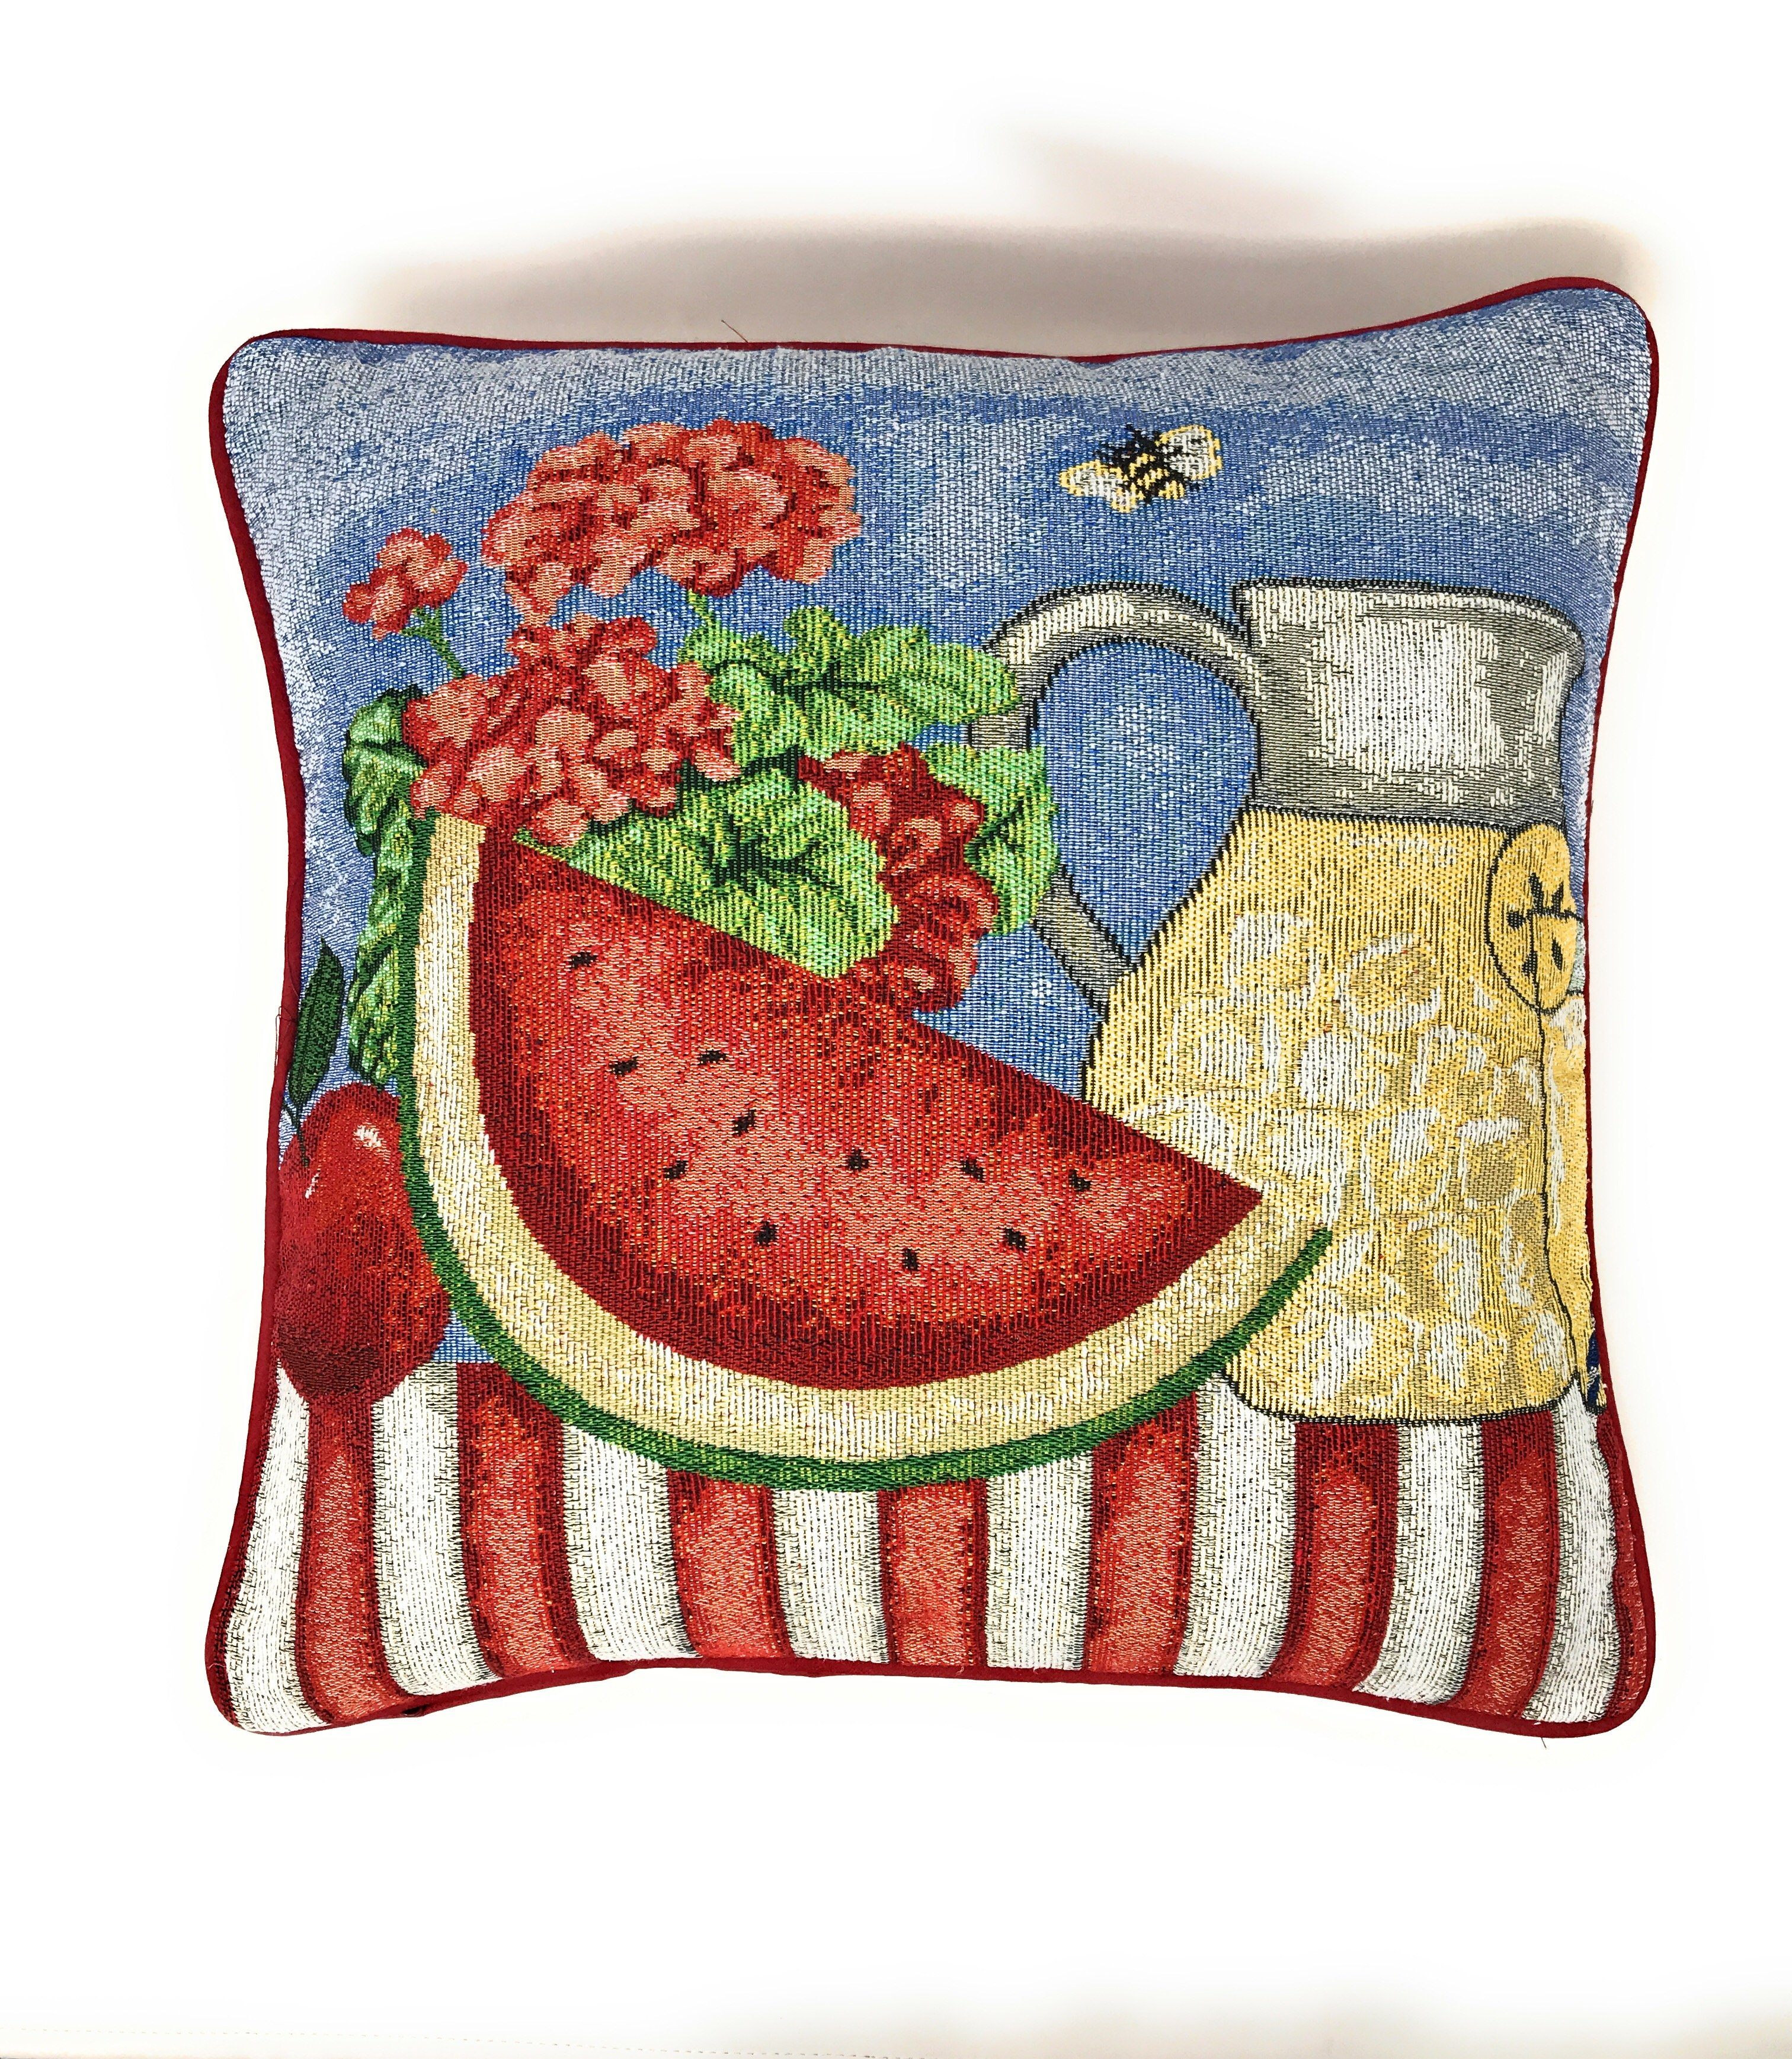 Tache Fruity Drinks Watermelon Lemonade Woven Tapestry Accent Throw Pillow Cover (13082CC) - Tache Home Fashion